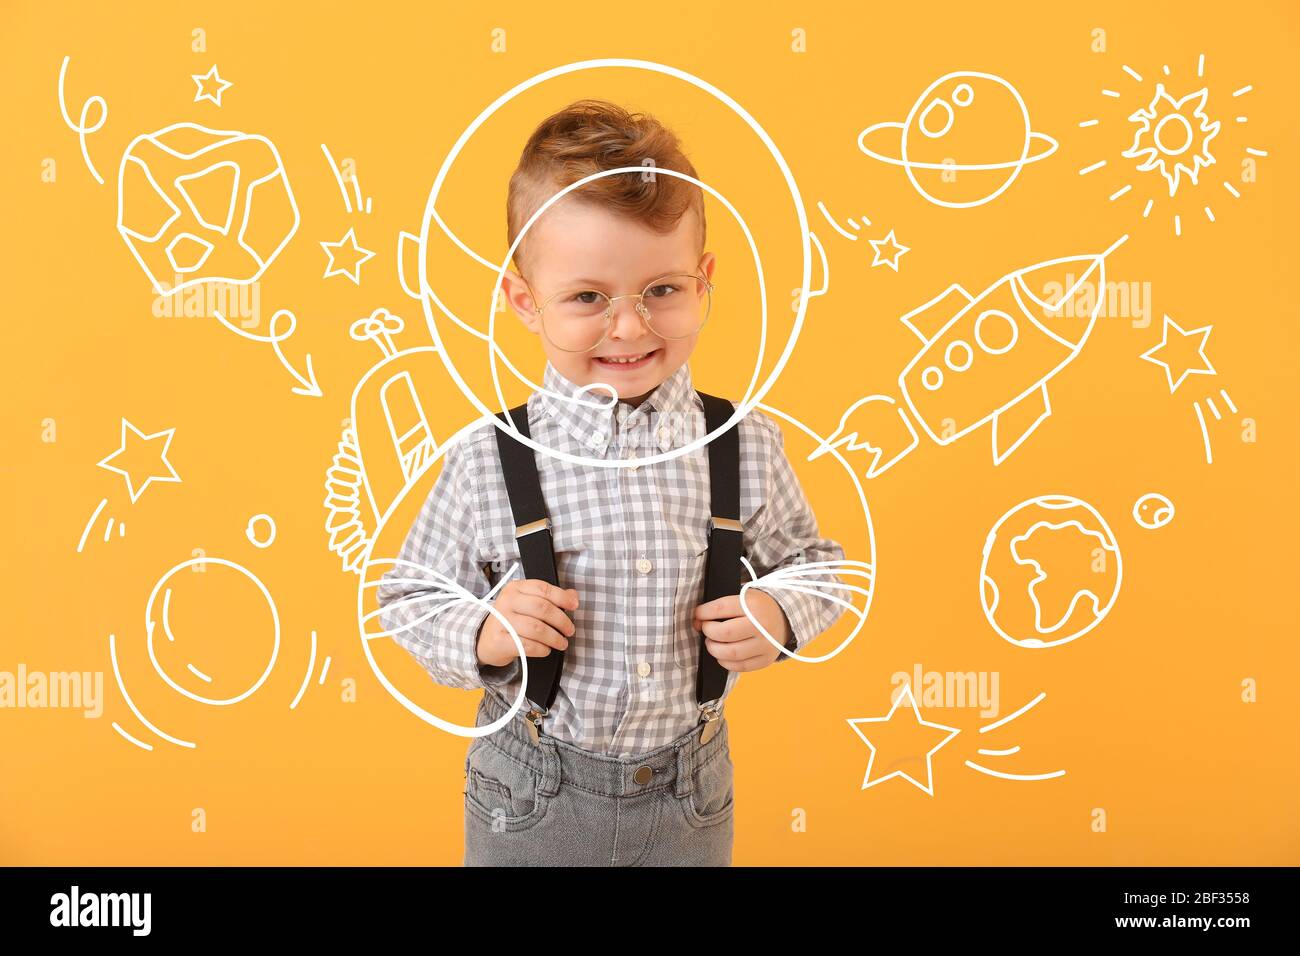 Cute little boy dreaming about space flight on color background Stock Photo